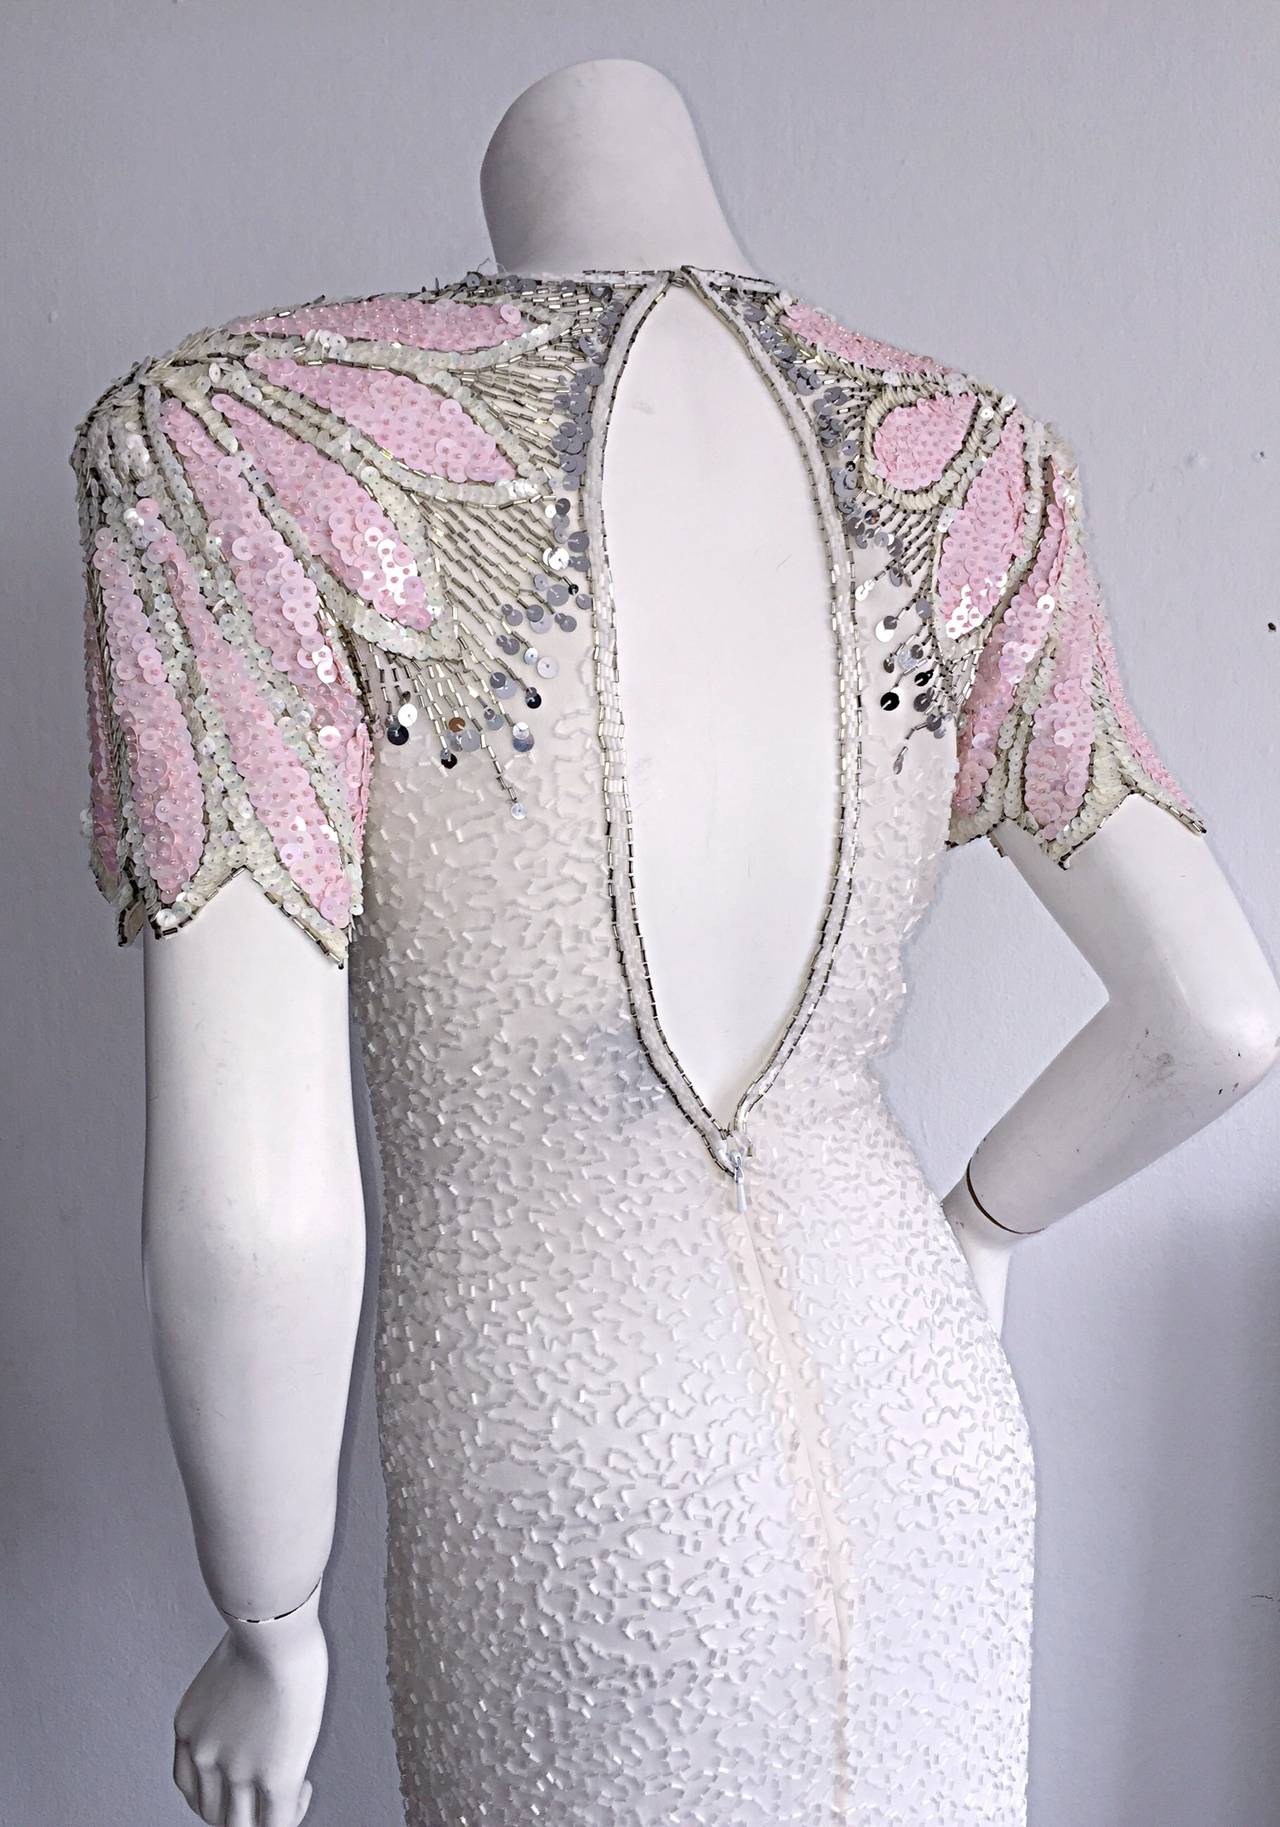 Stunning Vintage White + Pink + Silver Beaded Sequin Illusion Dress w/ Open Back 1